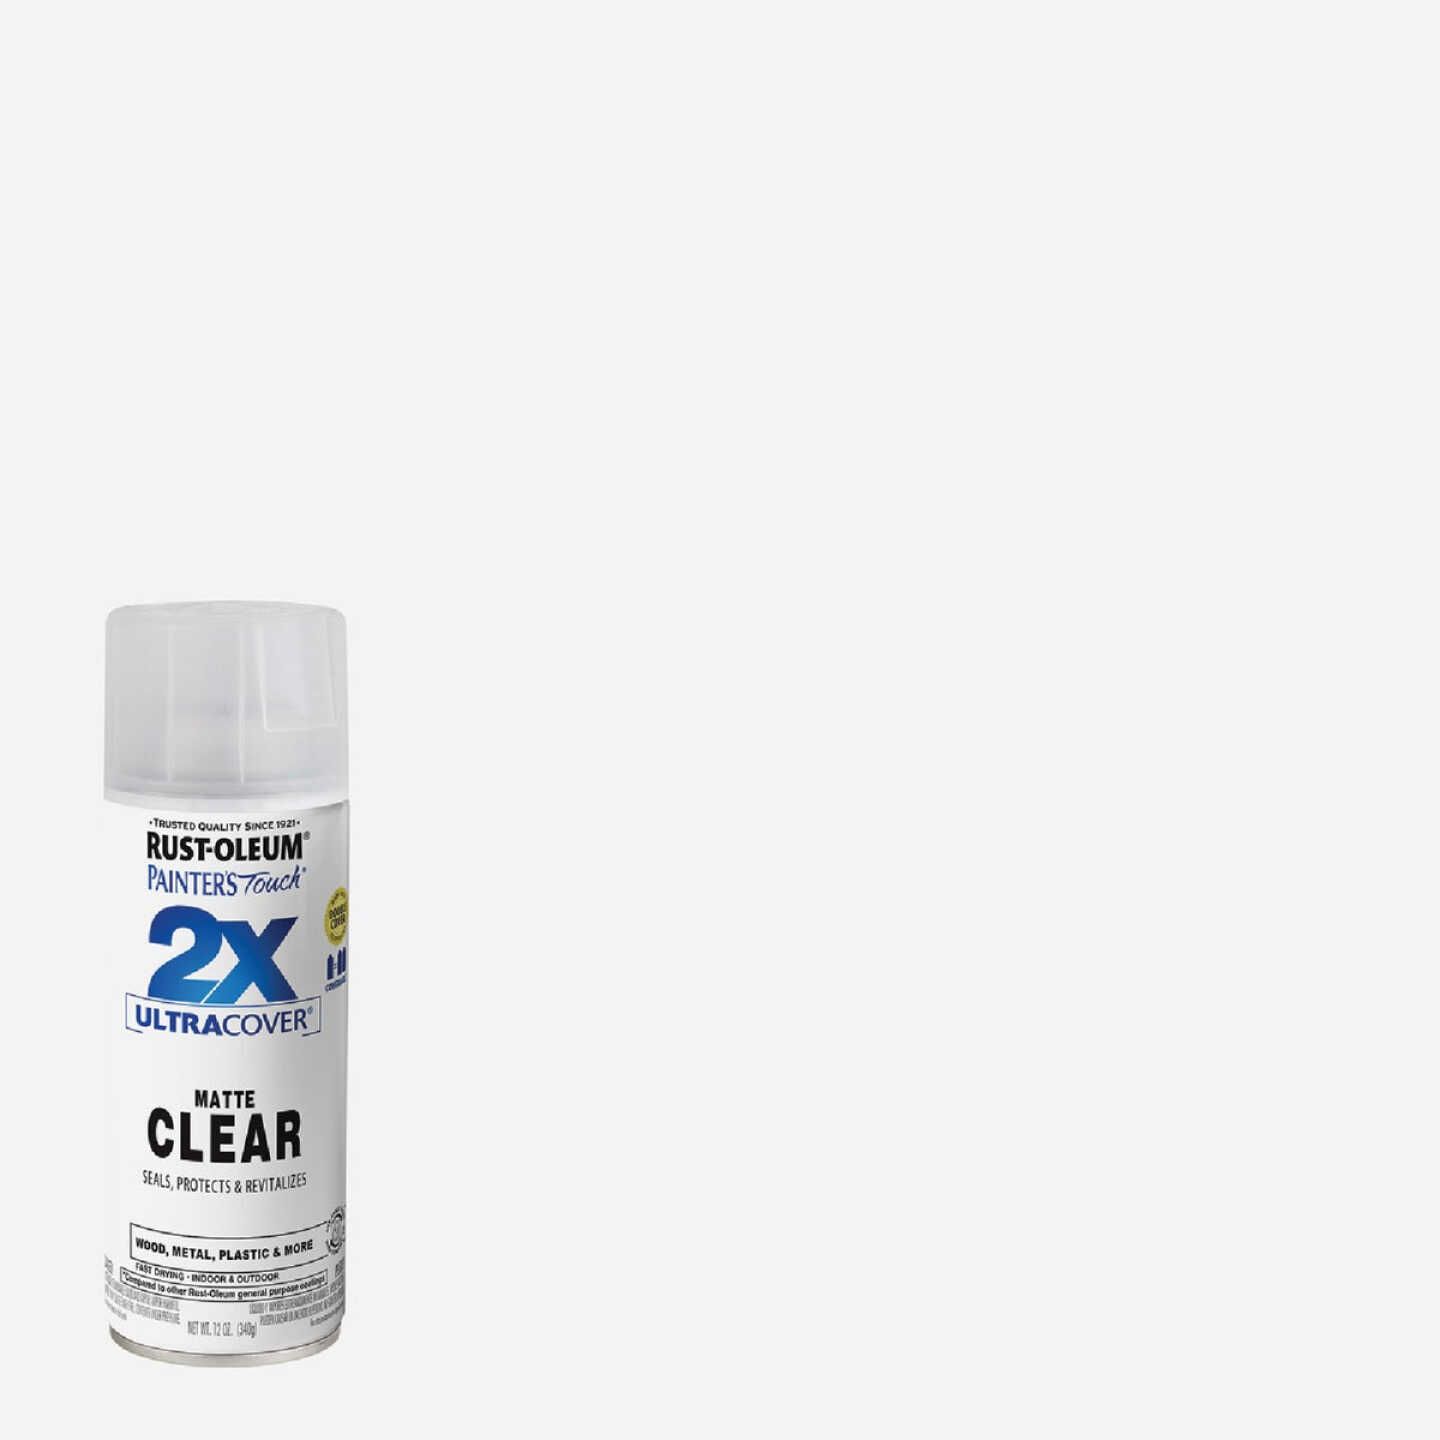 Krylon COLORmaxx Flat Crystal Clear Spray Paint and Primer In One